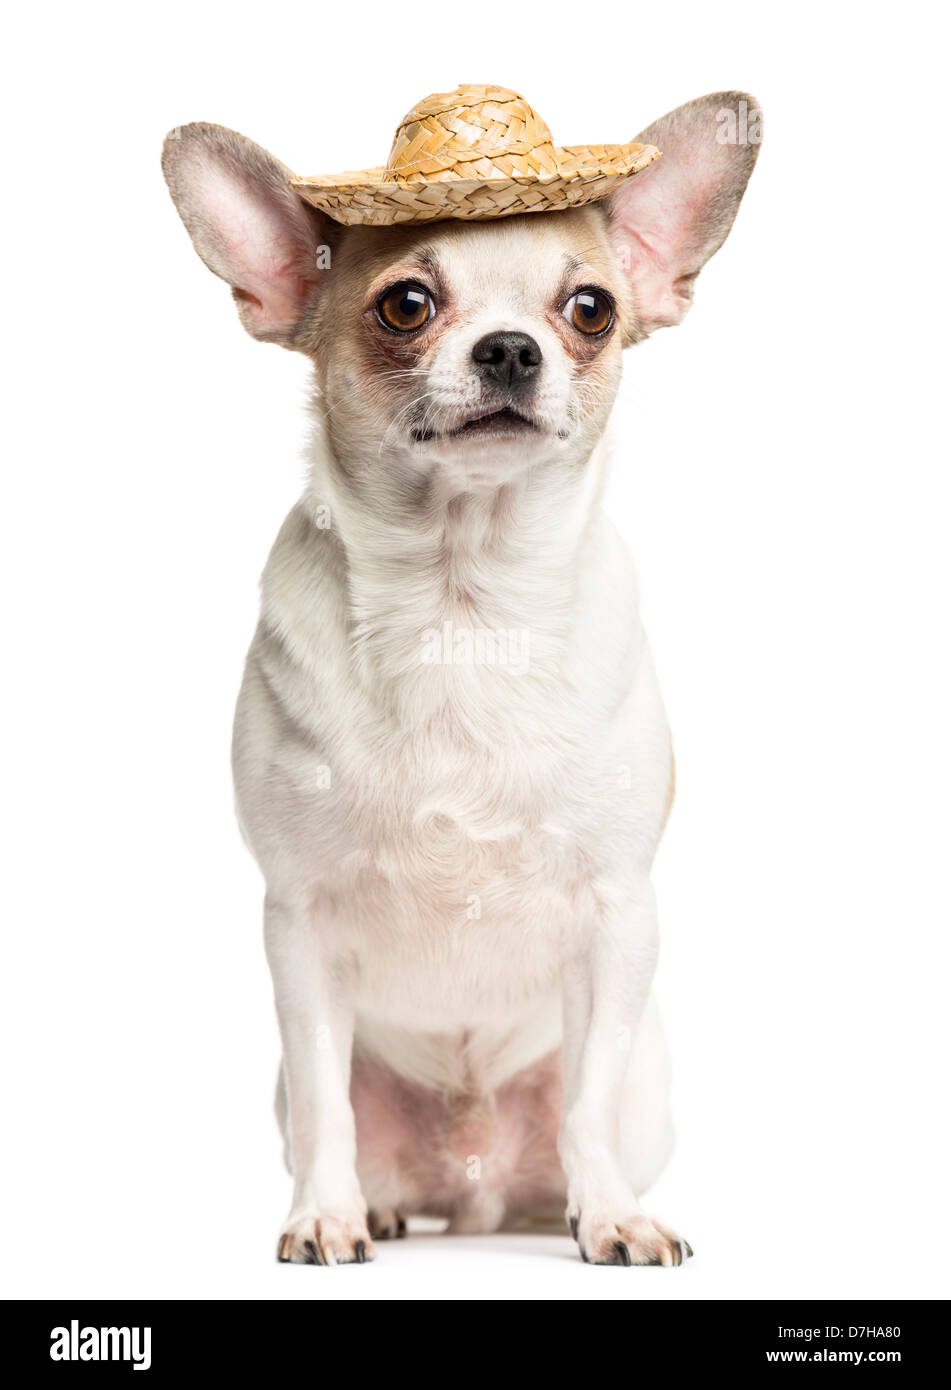 Chihuahua, 2 years old, sitting and wearing a straw hat against white background Stock Photo